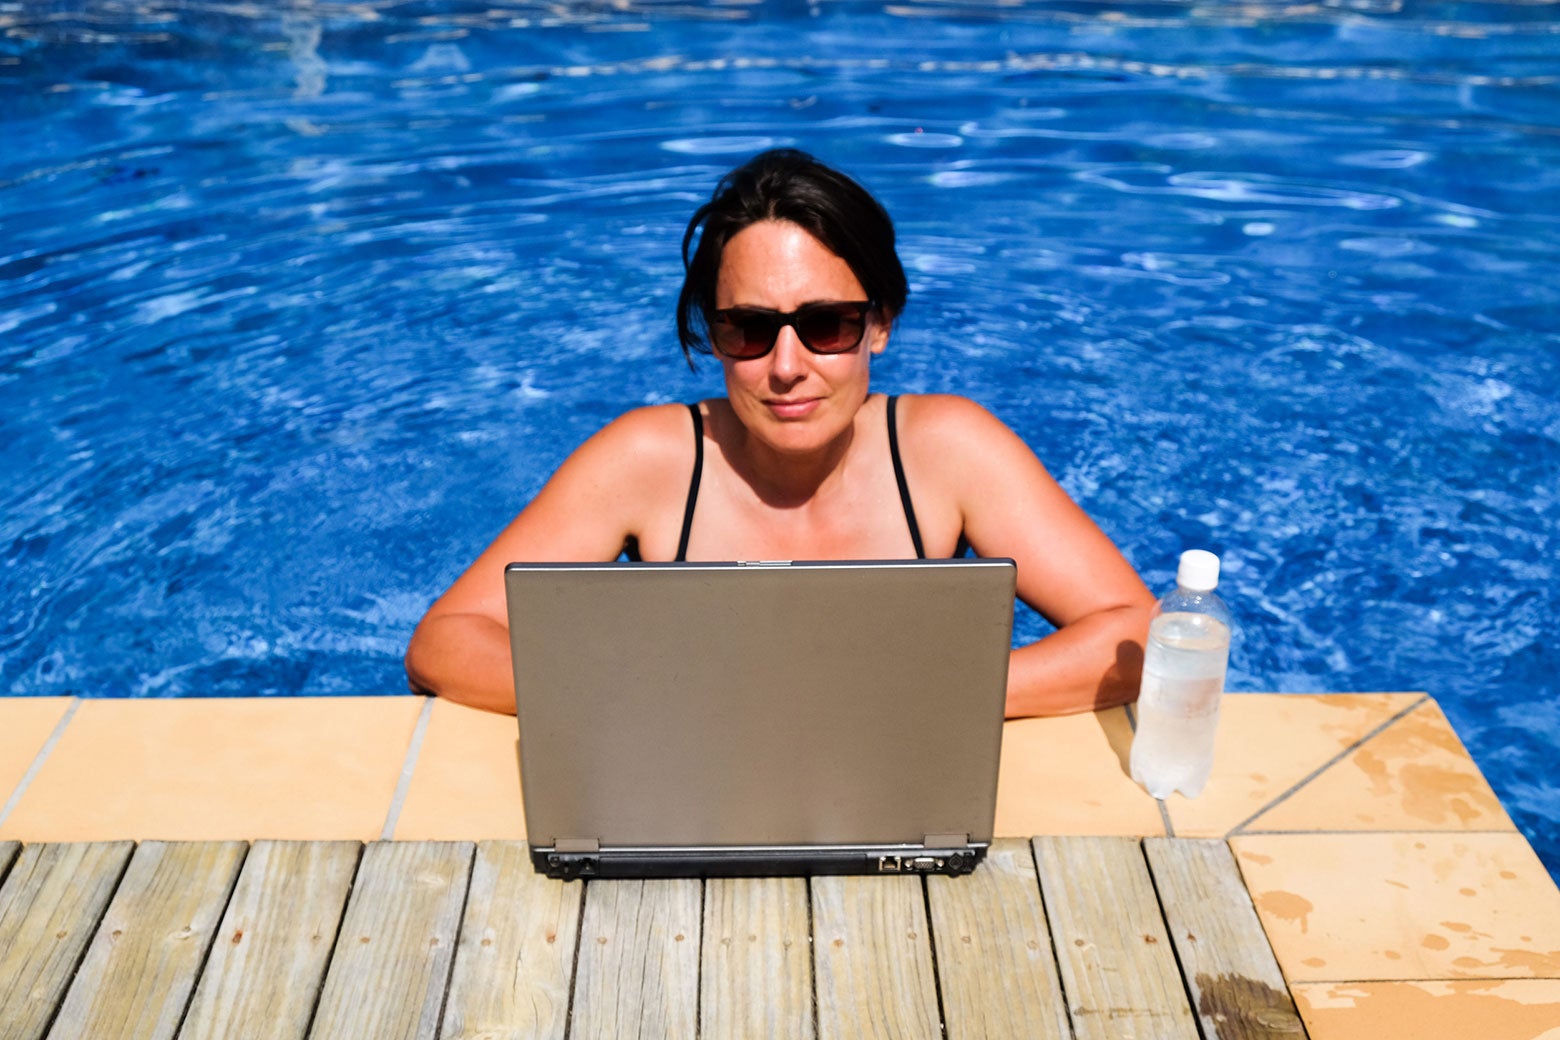 A woman in a swimming pool uses a laptop on the deck of the pool.